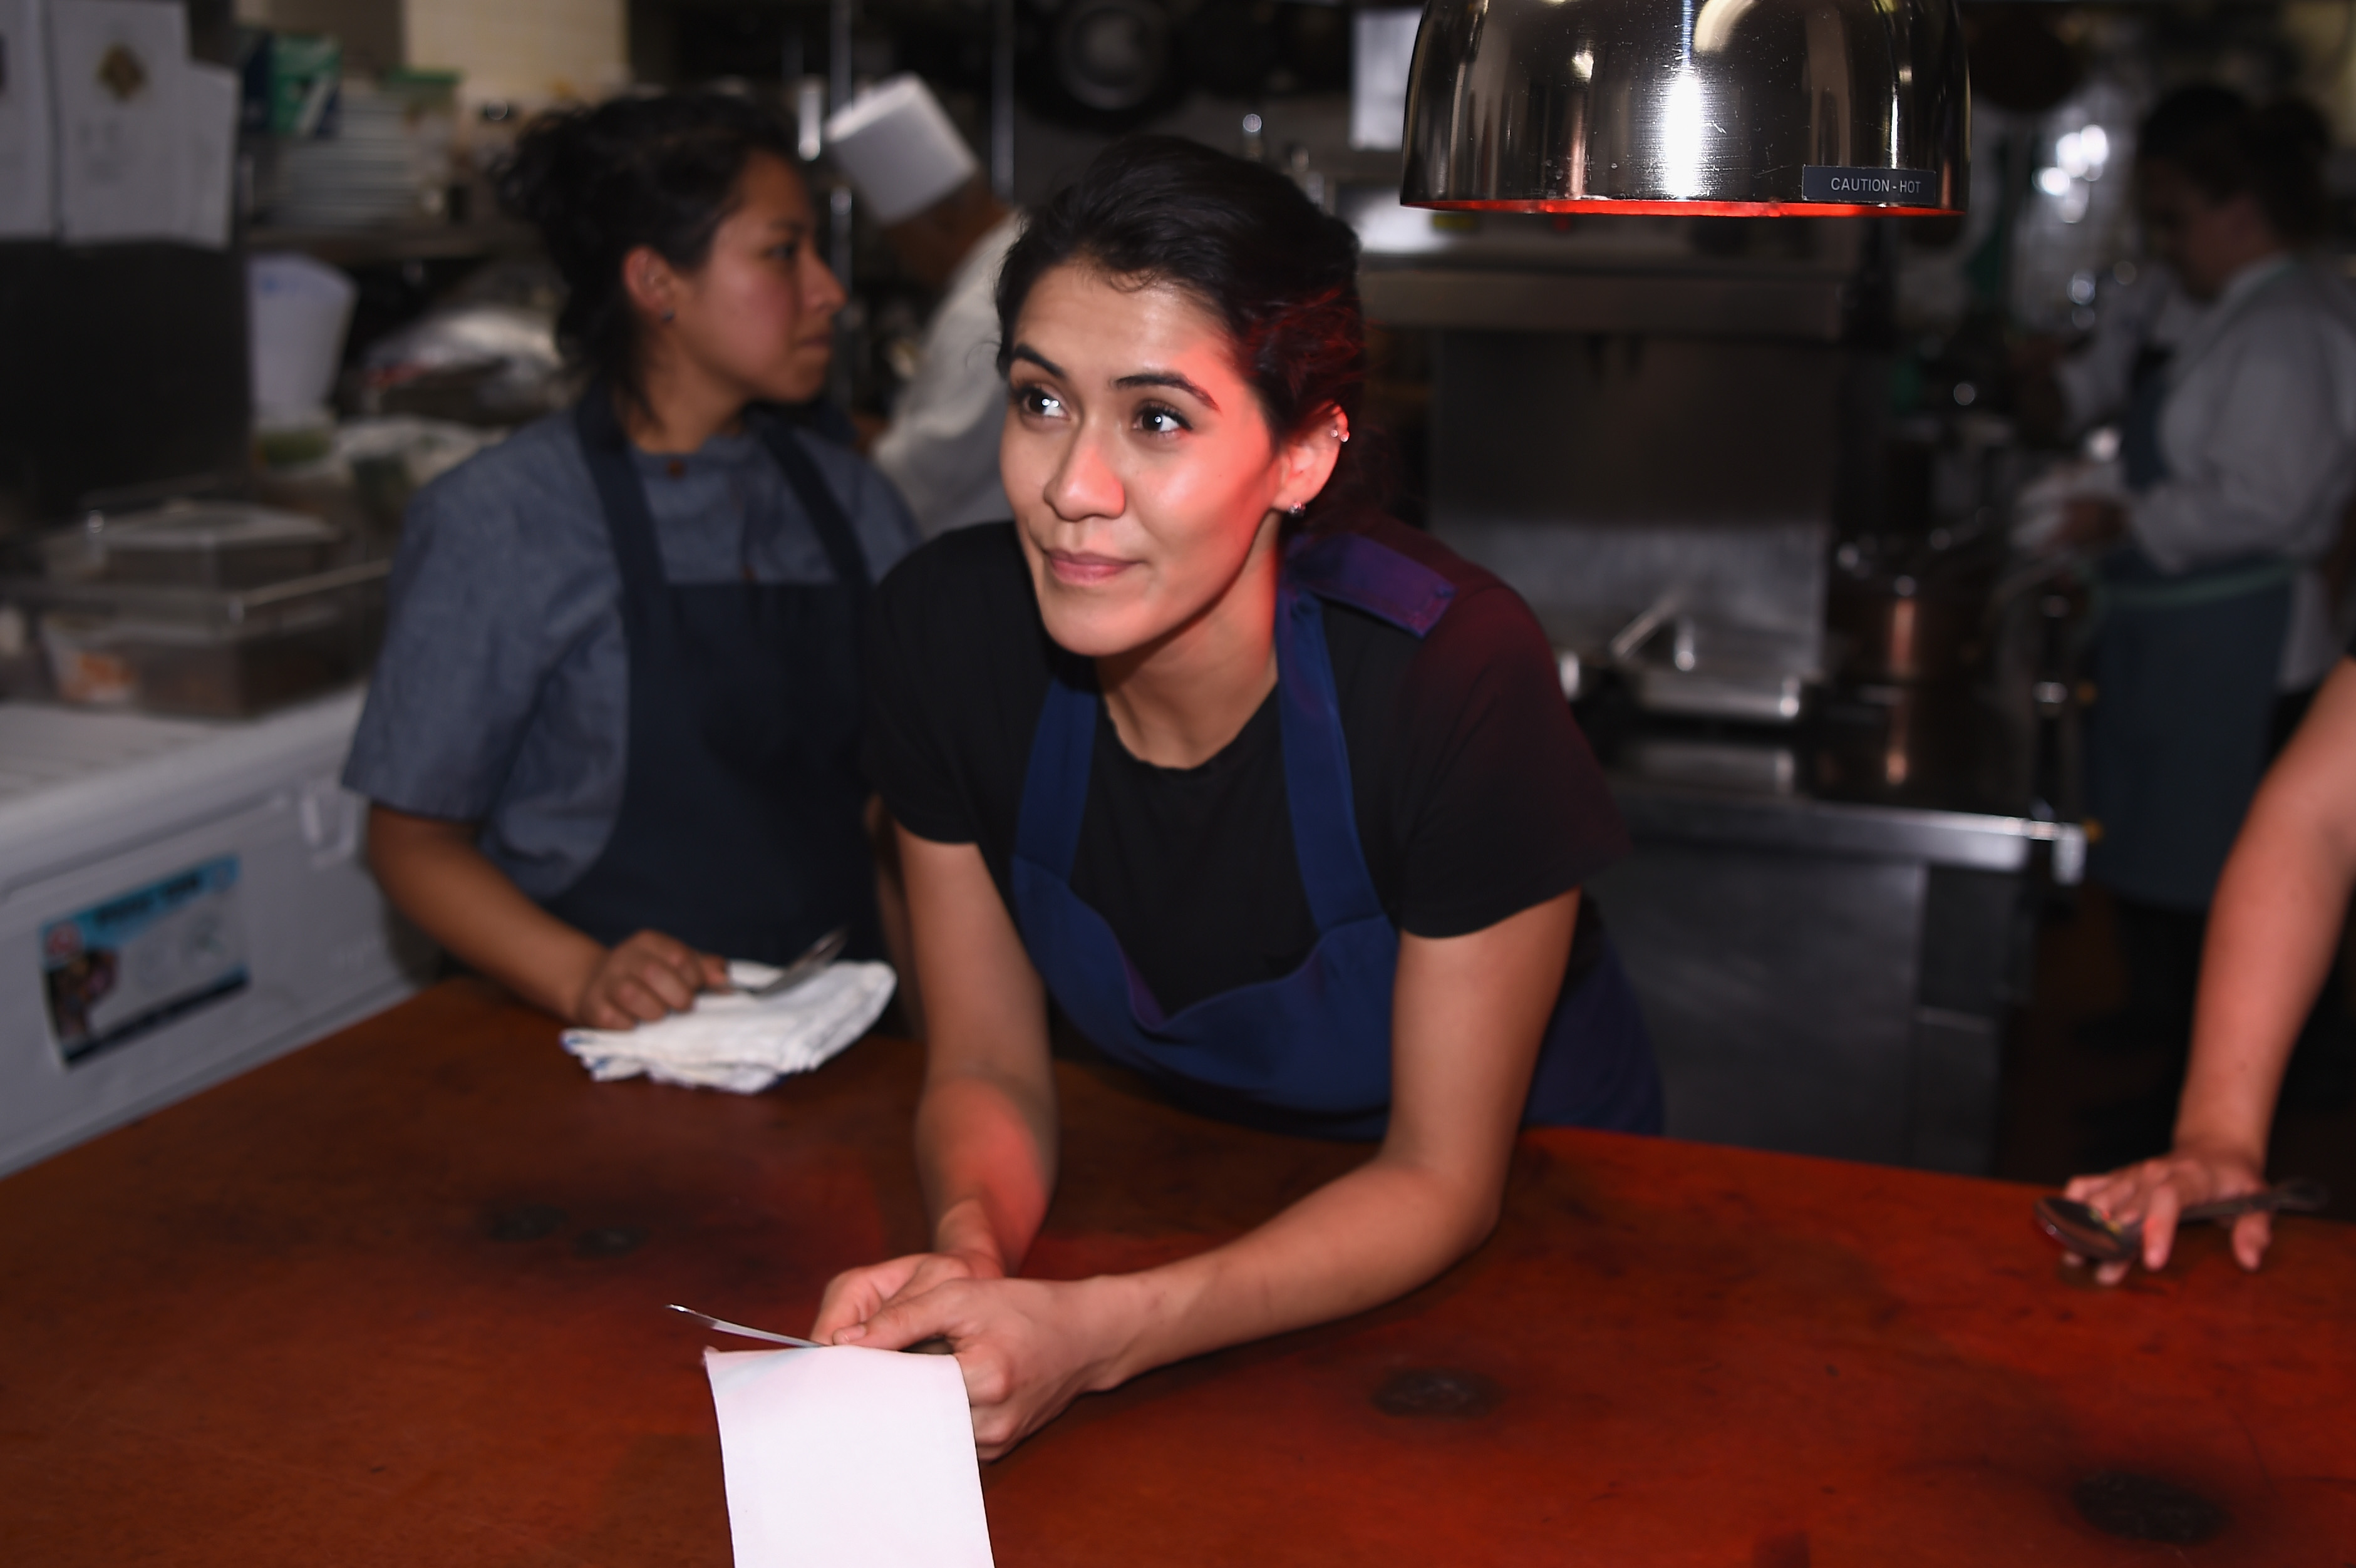 Chef Daniela Soto- Innespart prepares food for A Dinner with Rick Bayless and Daniela Soto-Innes part of the Bank of America Dinner series curated by Chefs Club at Hôtel Plaza Athénée on October 14, 2016 in New York City. 